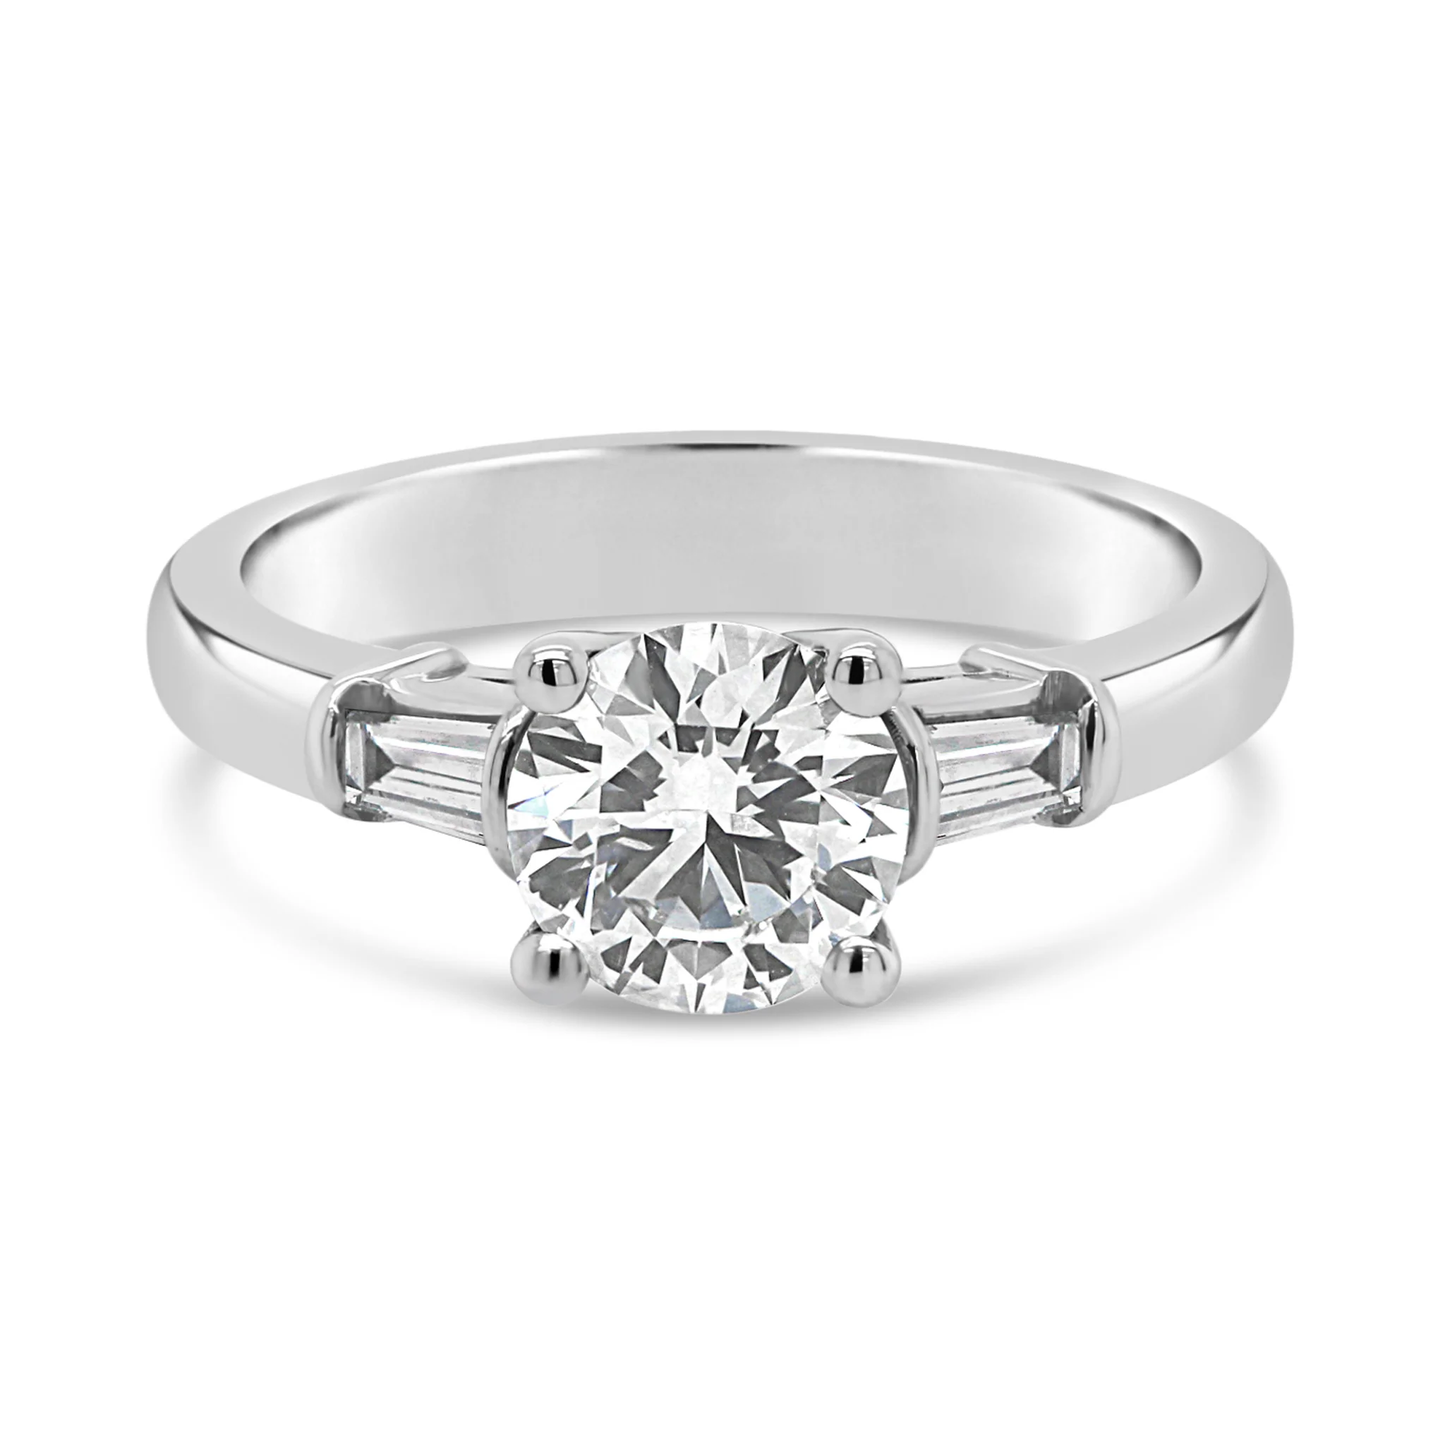 Designer Engagement Ring with 0.64 Carat TW Diamonds in 18kt White Gold